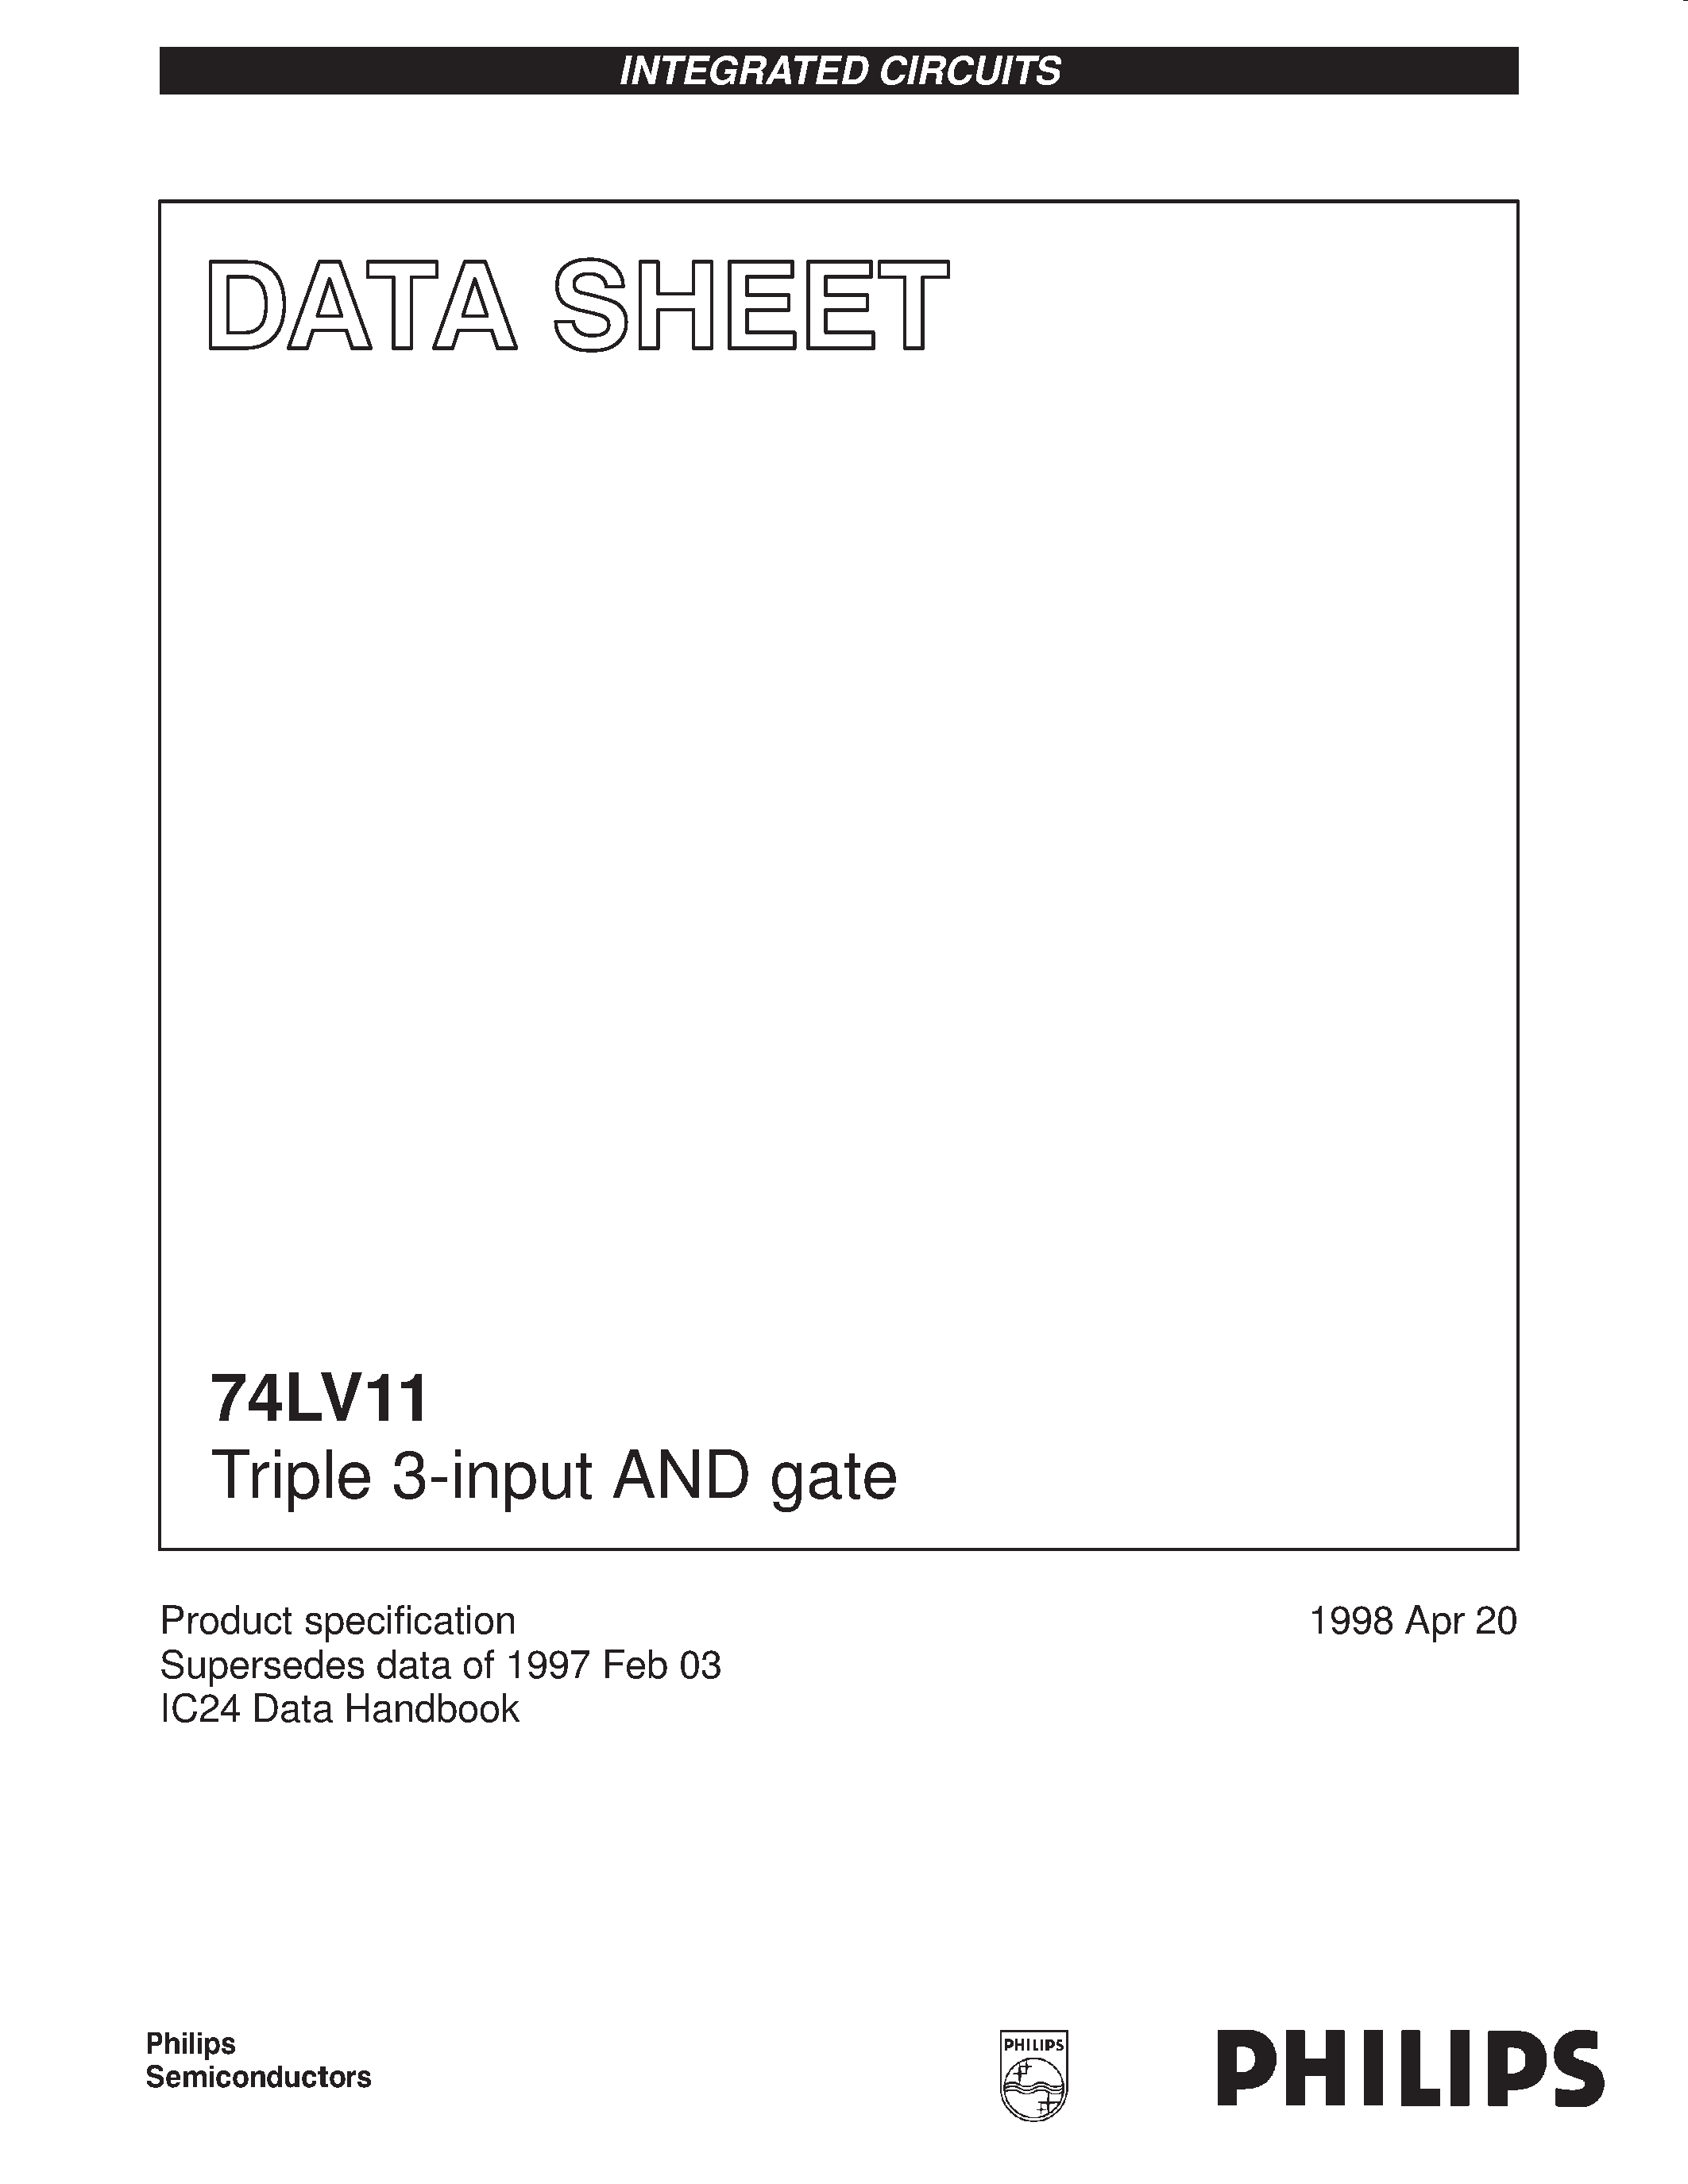 Datasheet 74LV11 - Triple 3-input AND gate page 1